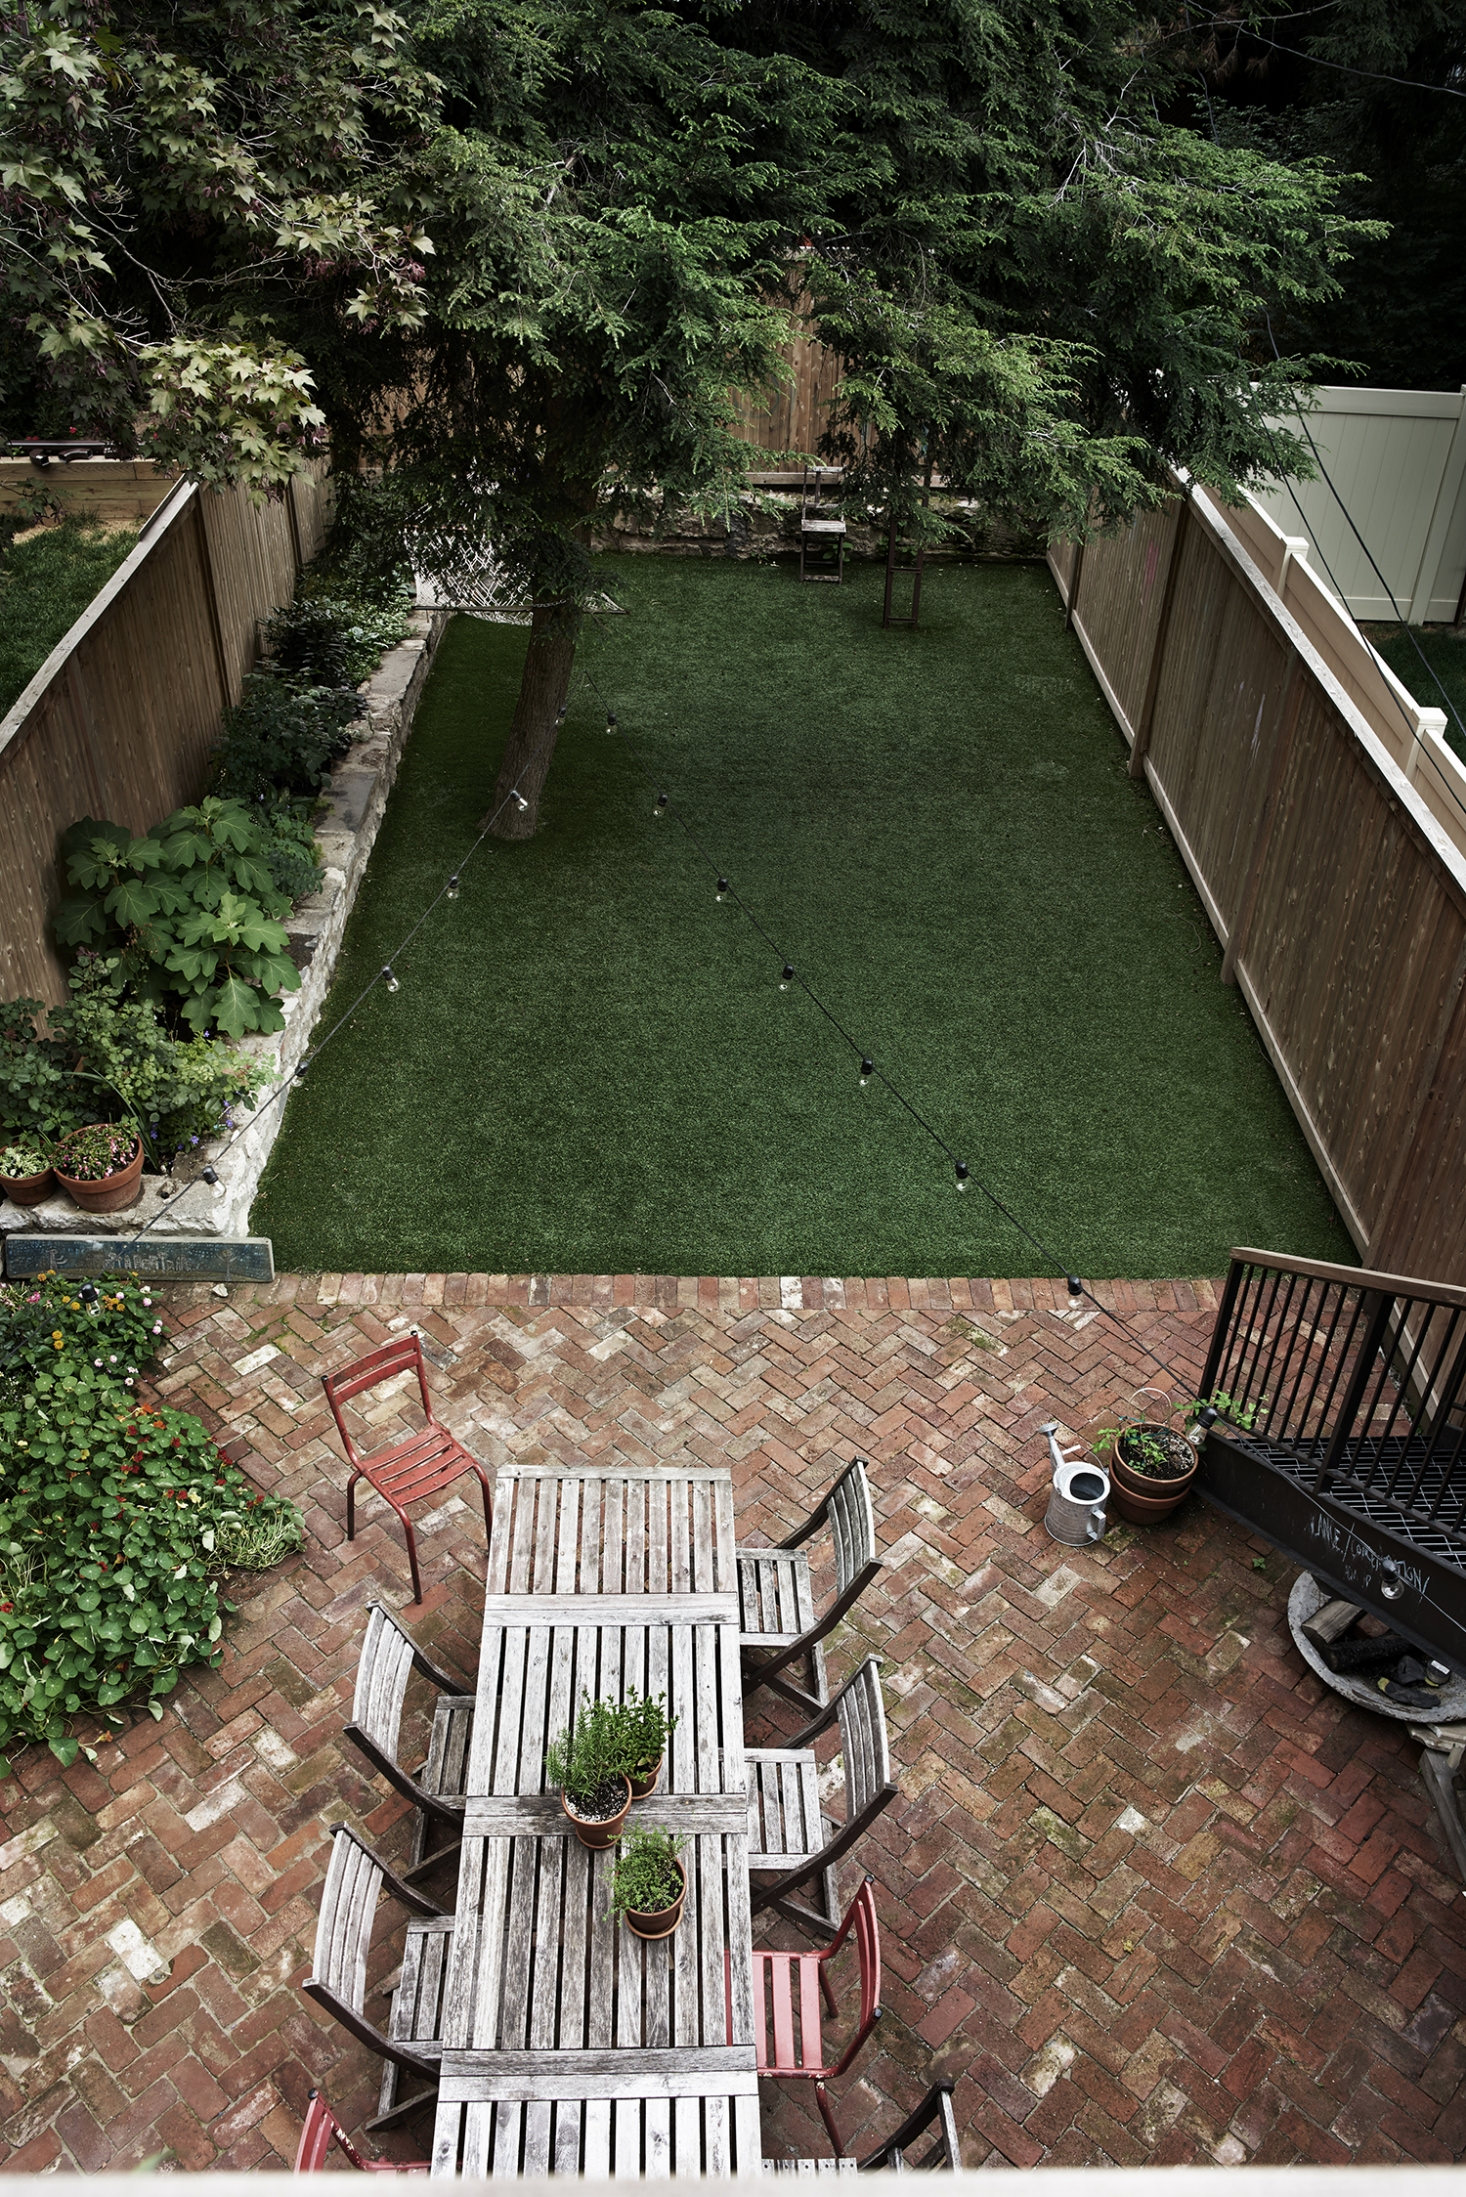 Artificial Grass: The Pros and Cons